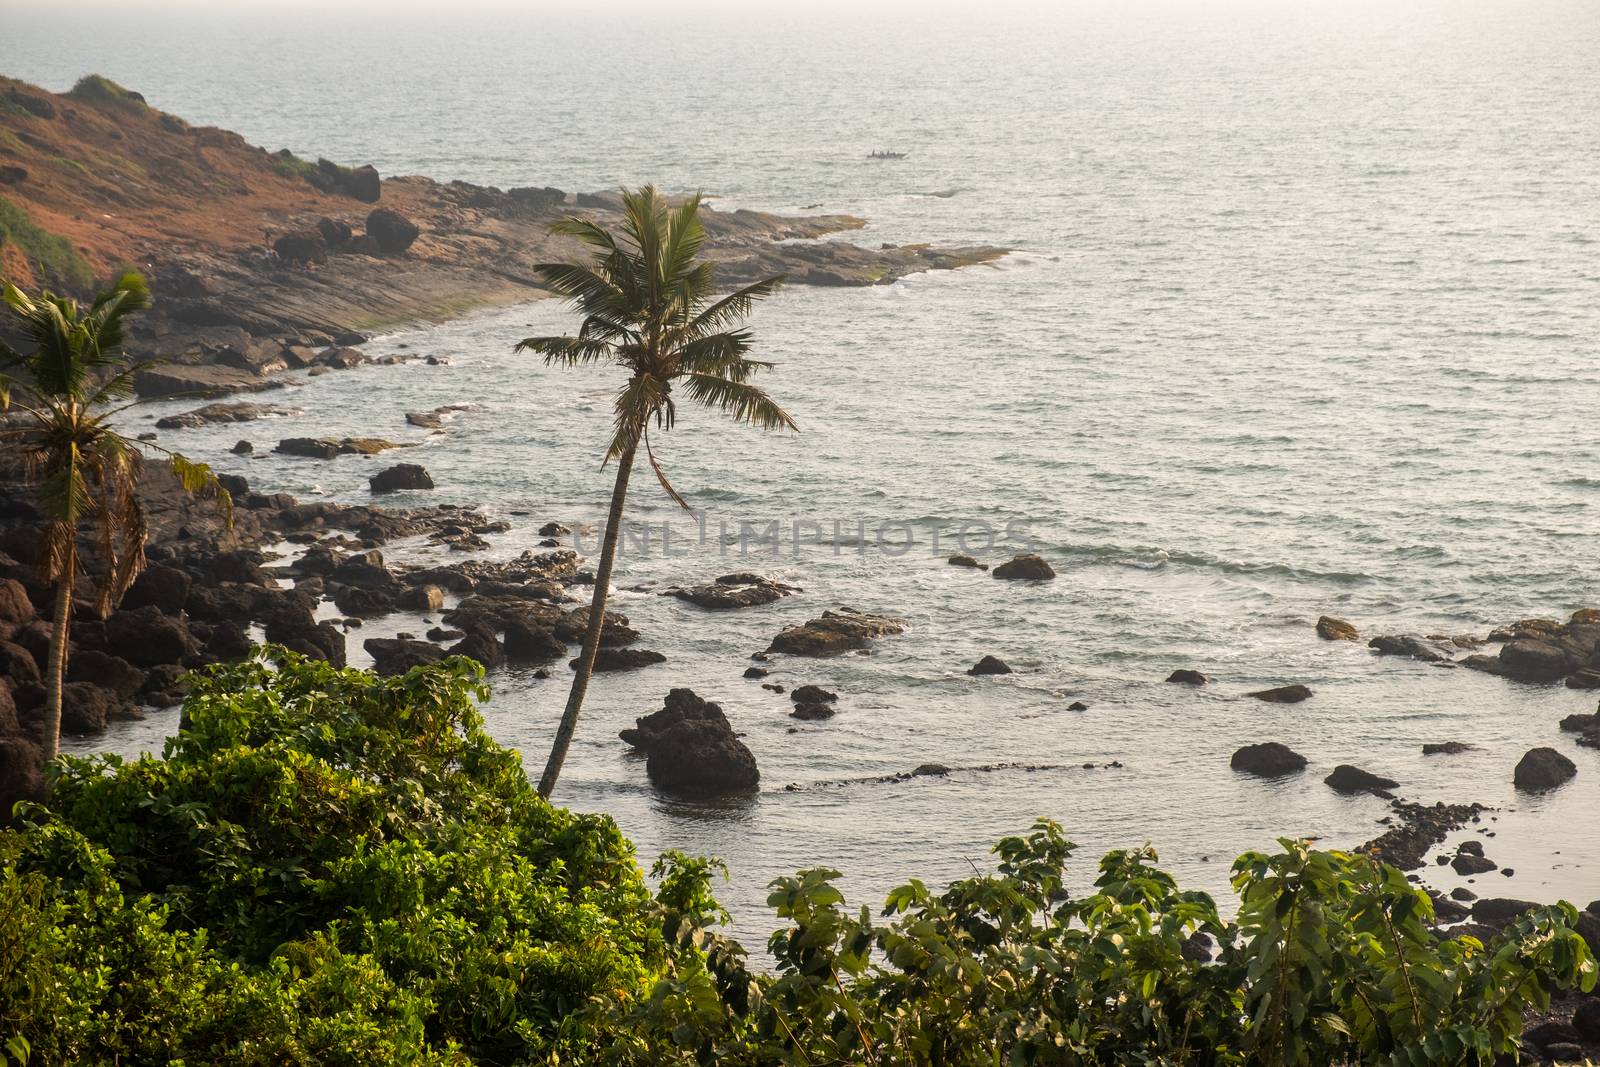 Top View on the coastline of the Northern Goa, India